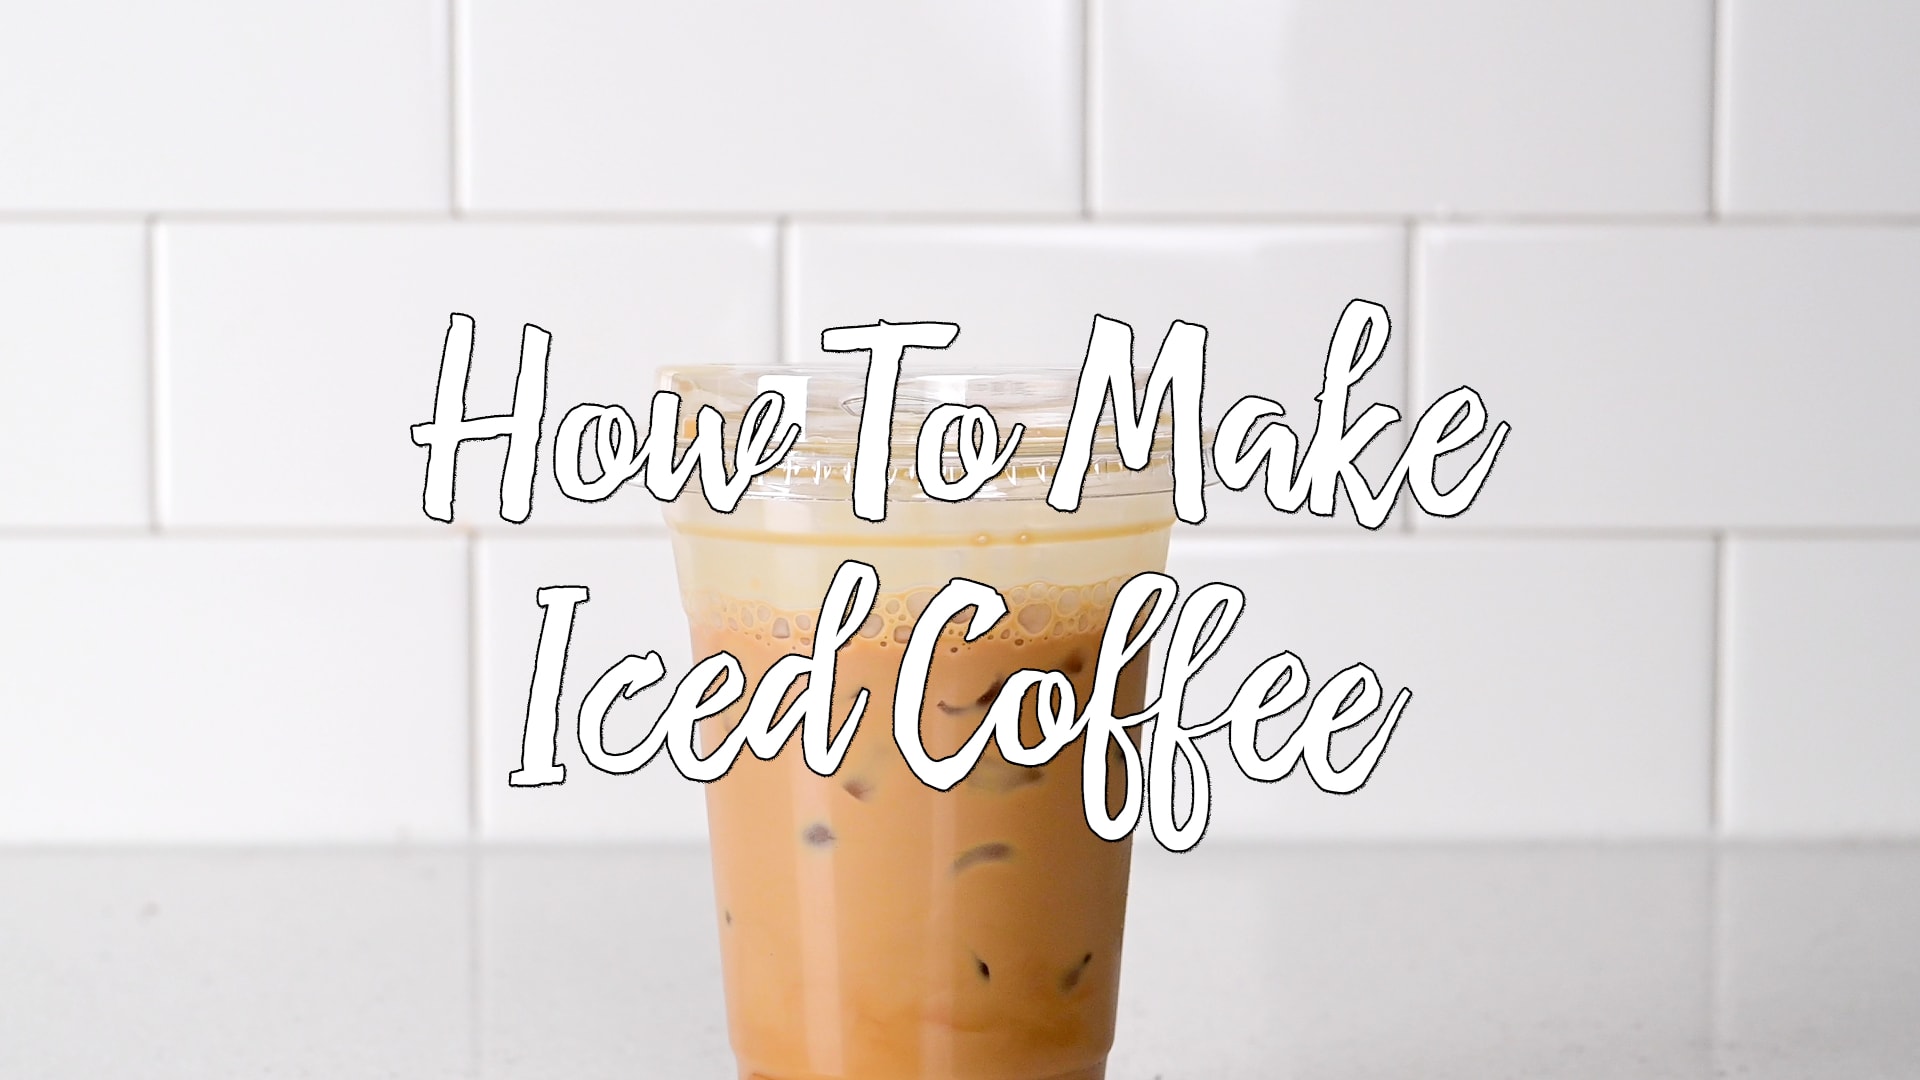 Keurig iced coffee recipe (and deal!) - Nap Time Is My Time